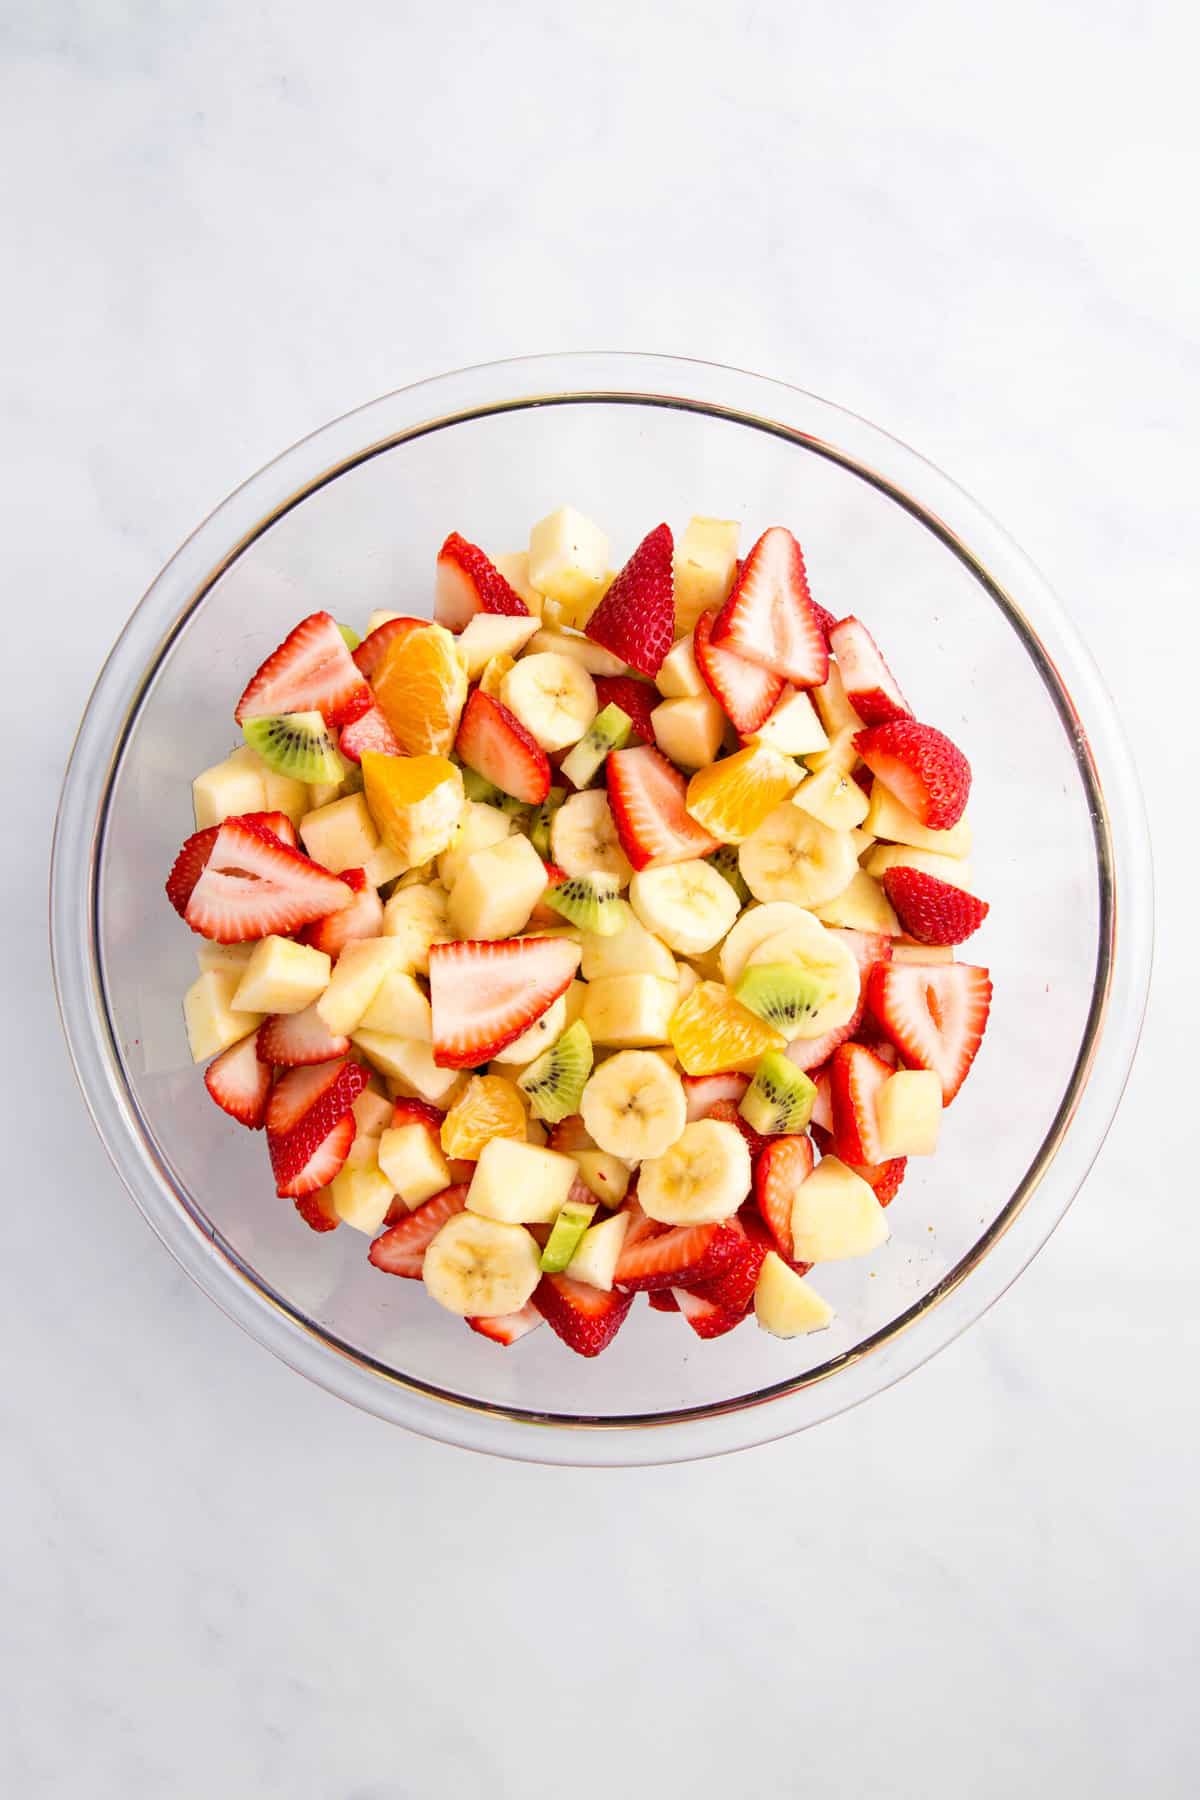 cut up strawberries, bananas, kiwi, oranges in a large glass bowl